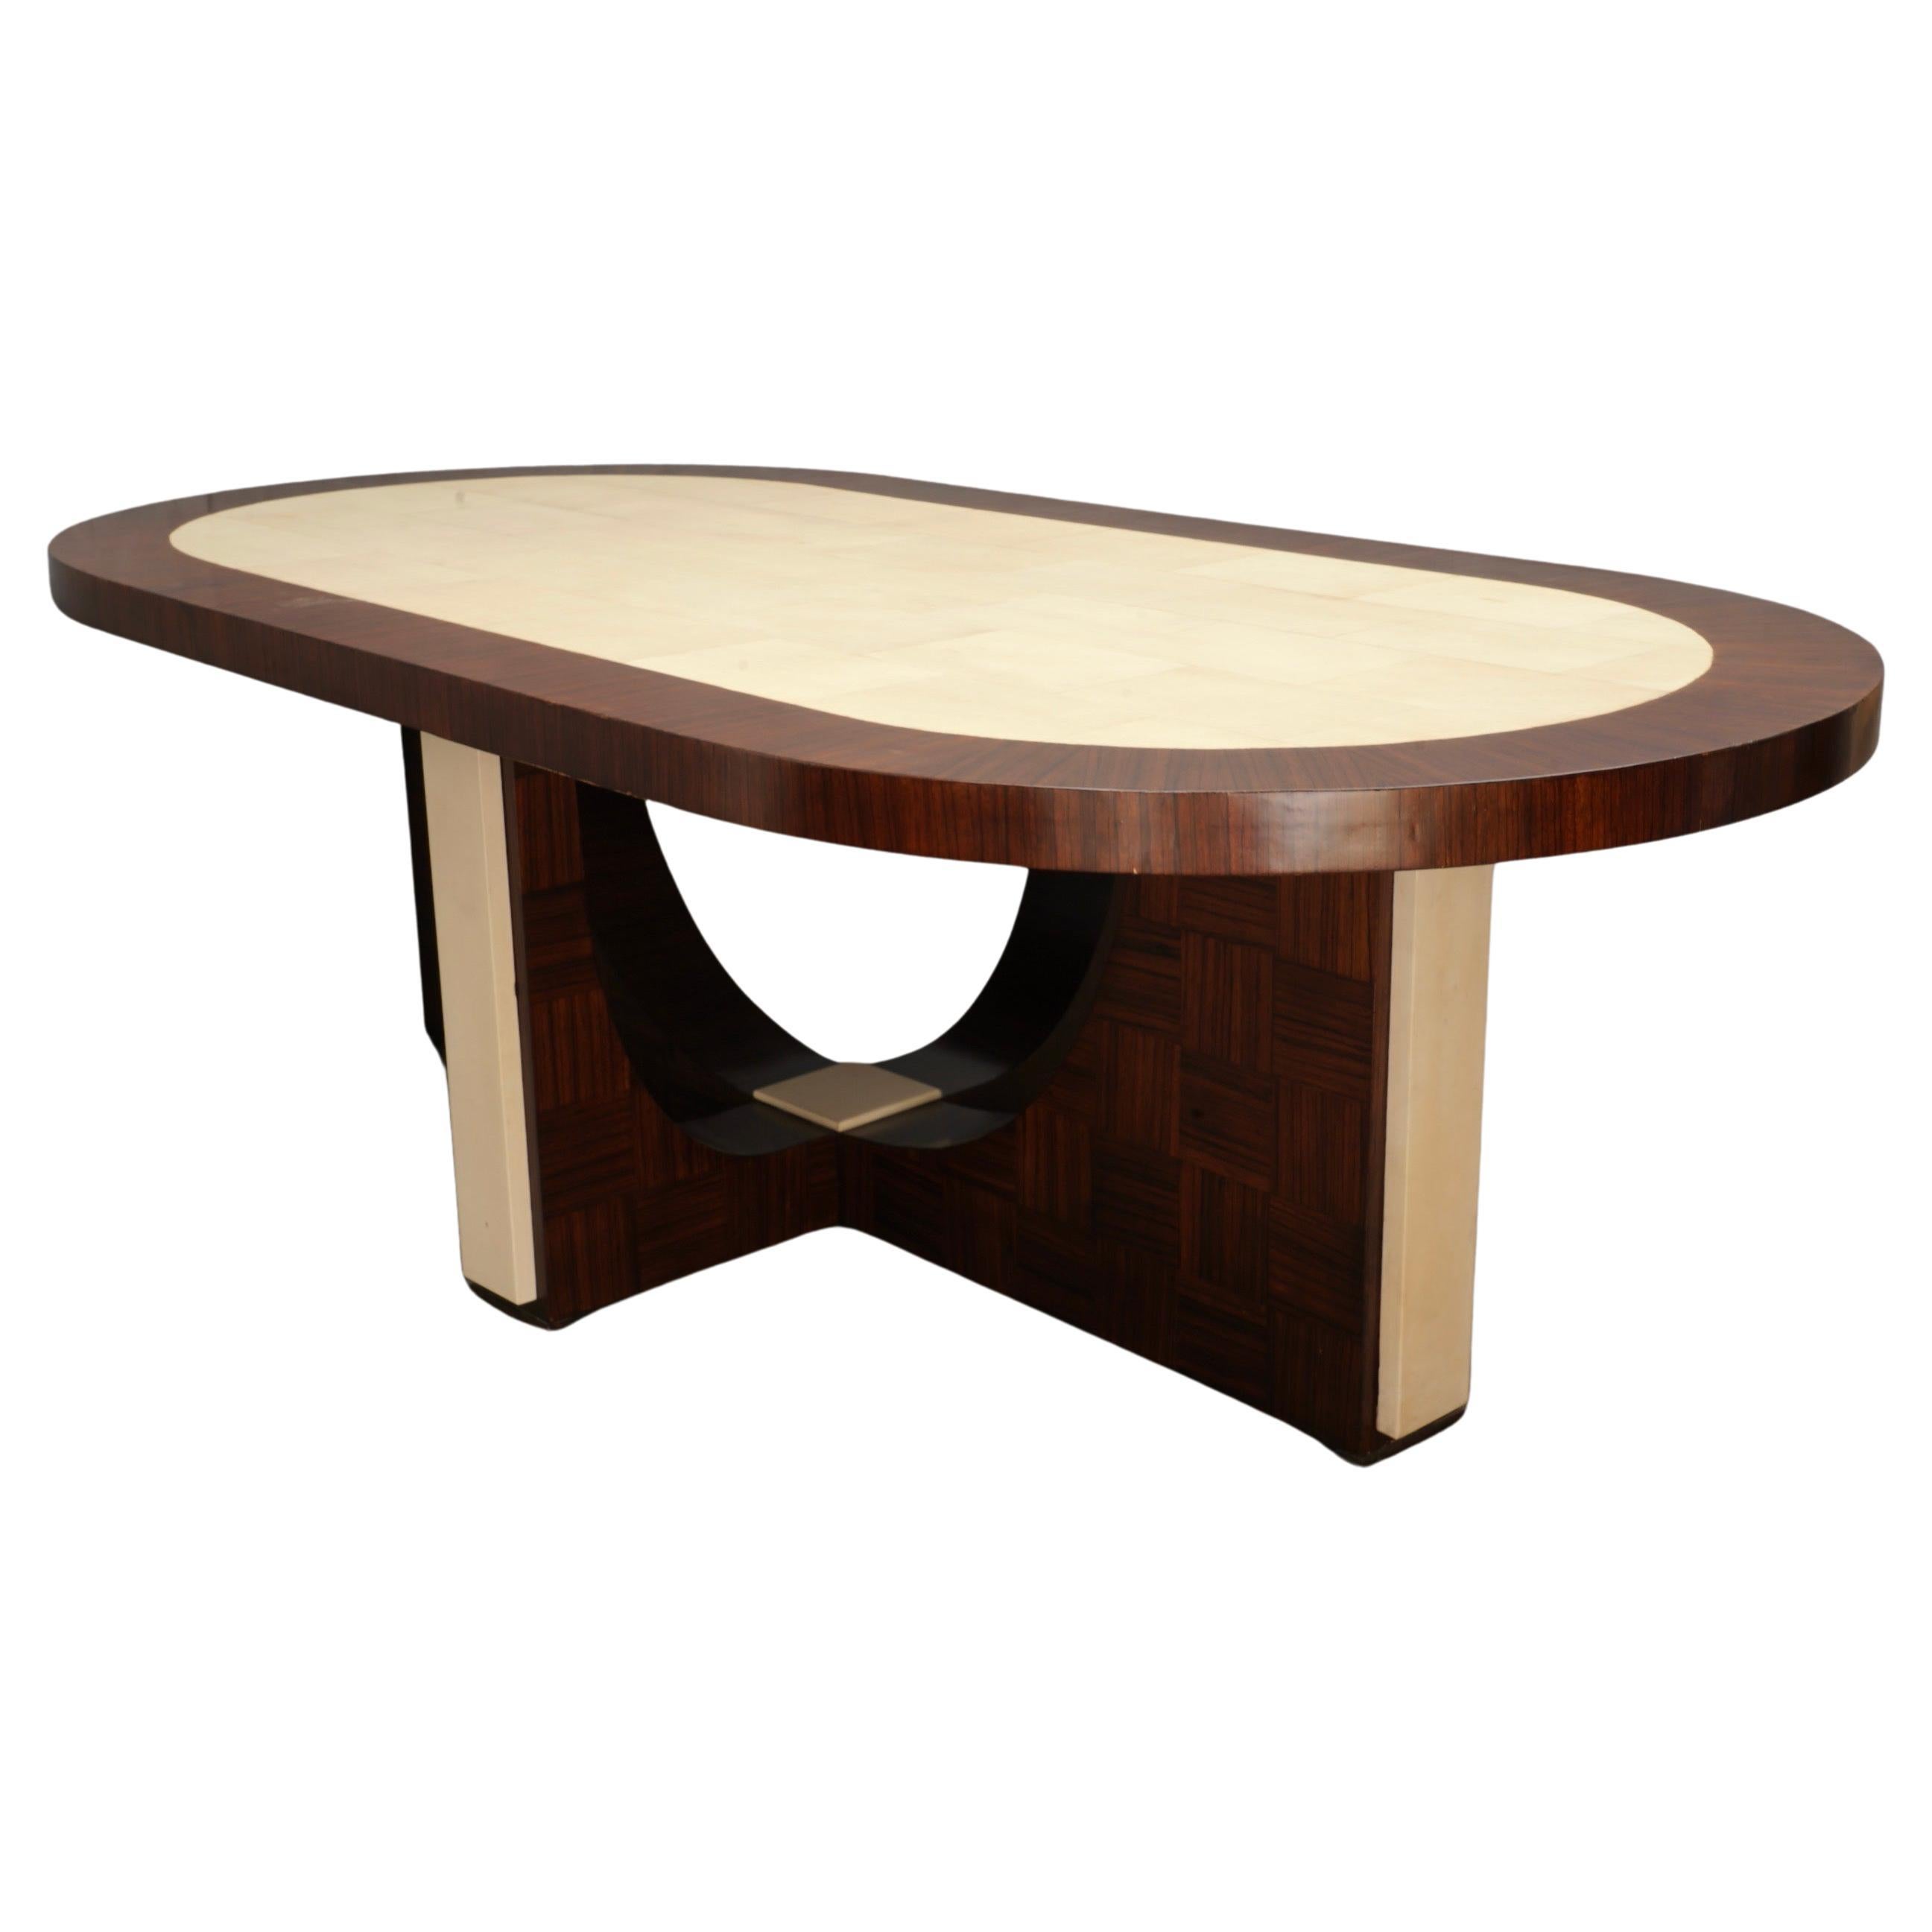 Midcentury Oval Zebrano Wood and Goatskin Italian Table, 1950 For Sale